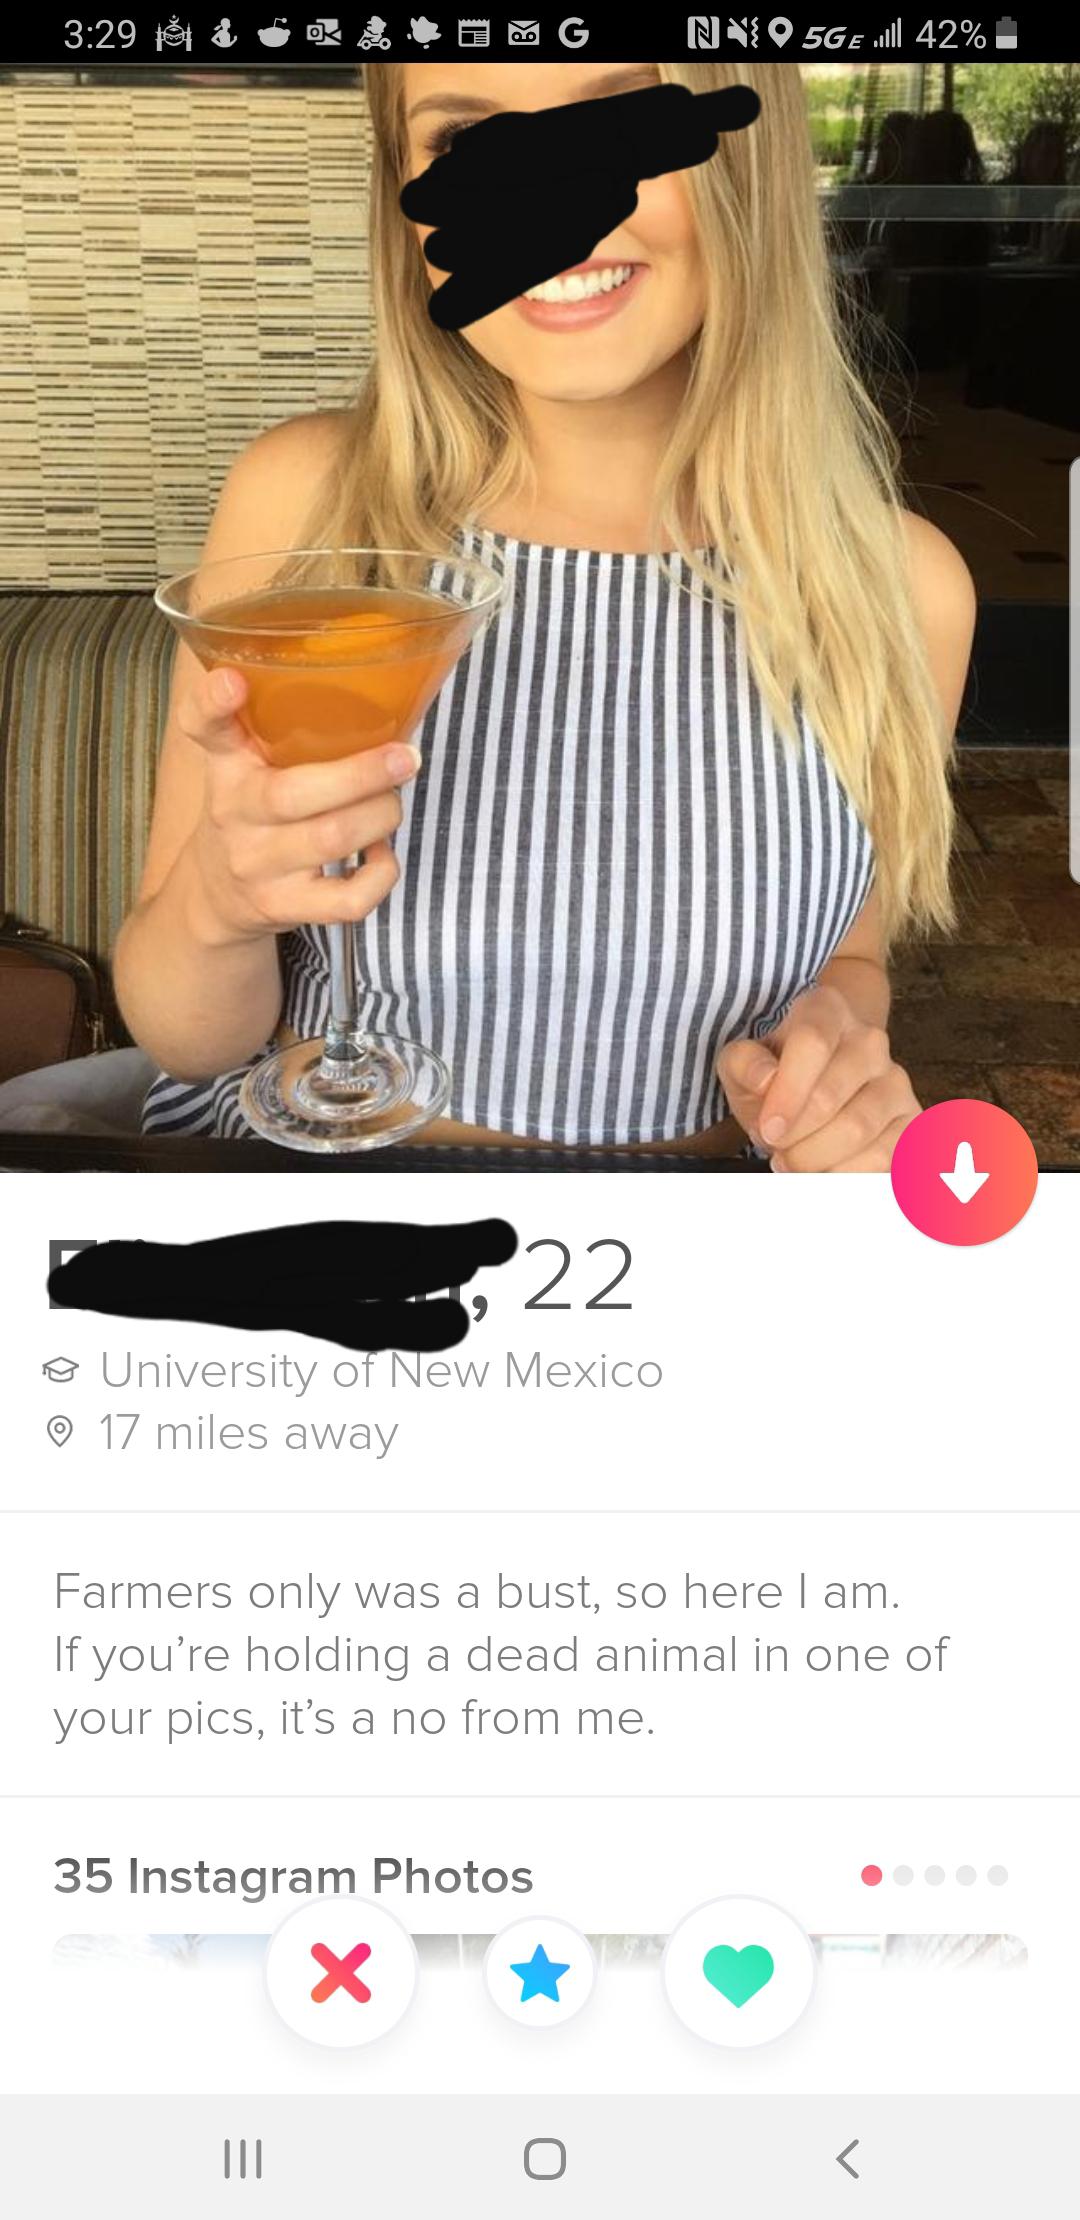 blond - B Soro Omg 'Nne O 5G E will 42% 22 @ University of New Mexico 17 miles away Farmers only was a bust, so here I am. If you're holding a dead animal in one of your pics, it's a no from me. 35 Instagram Photos Iii 0